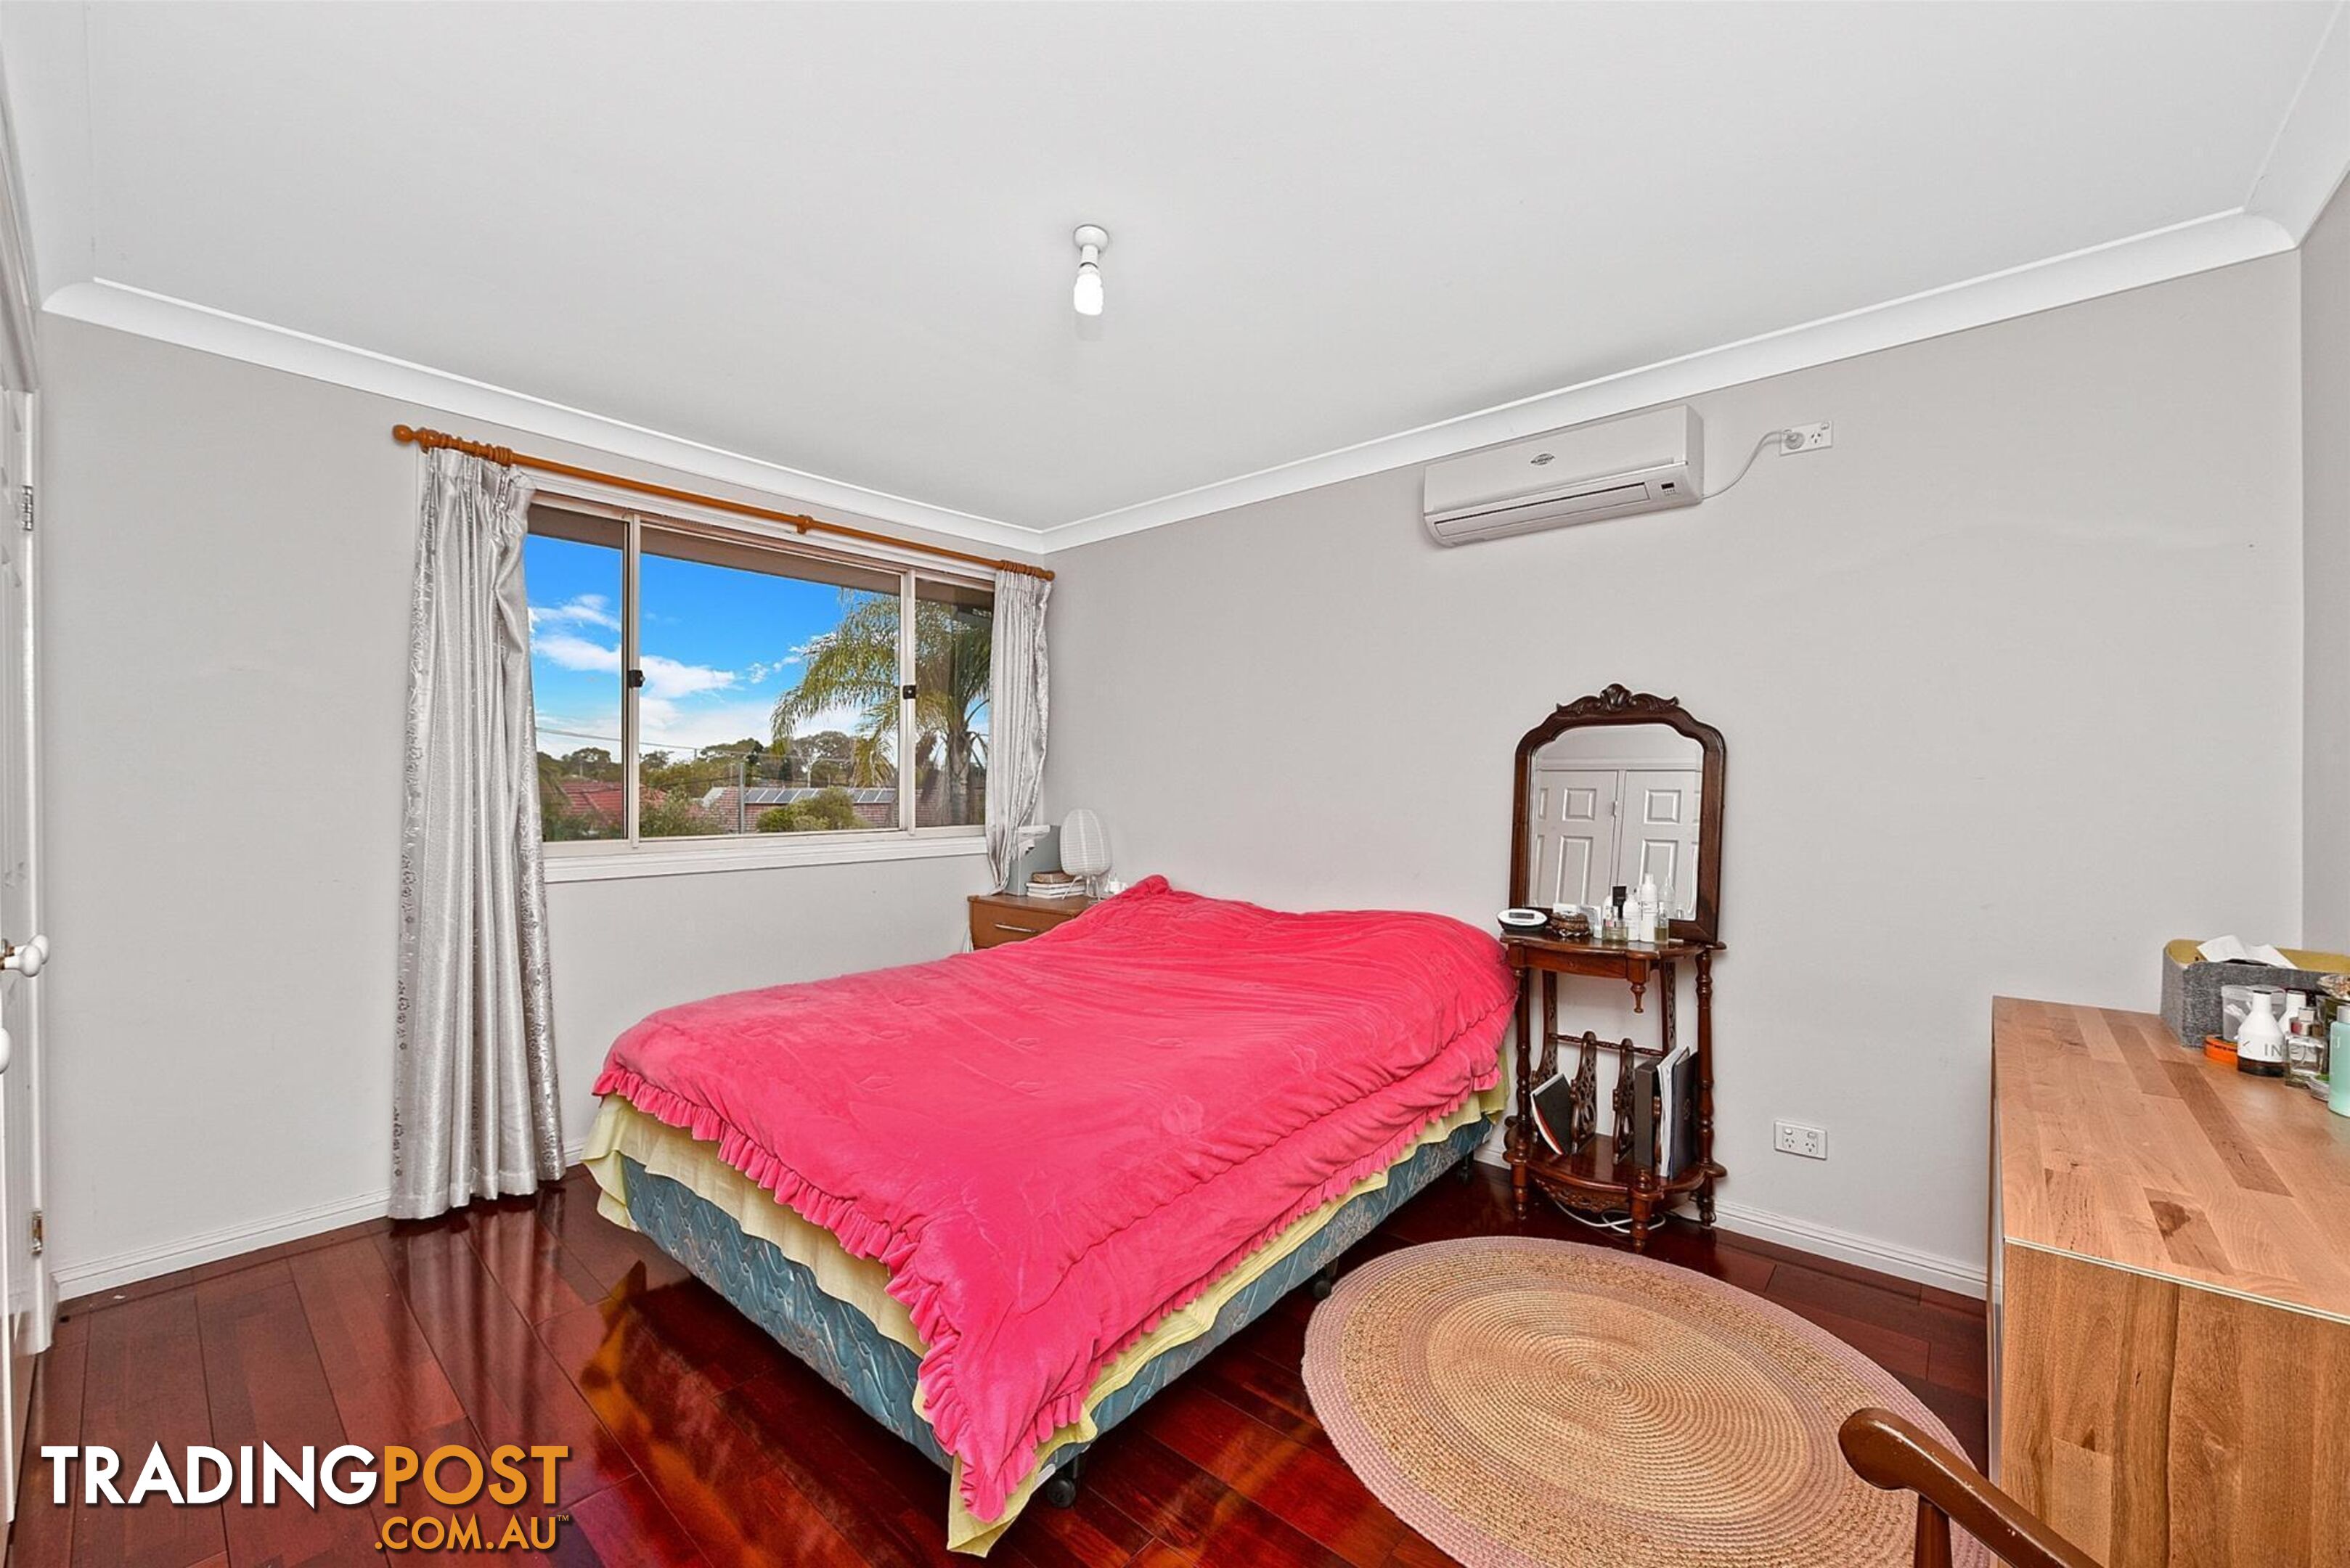 2/188 Hector Street Chester Hill NSW 2162